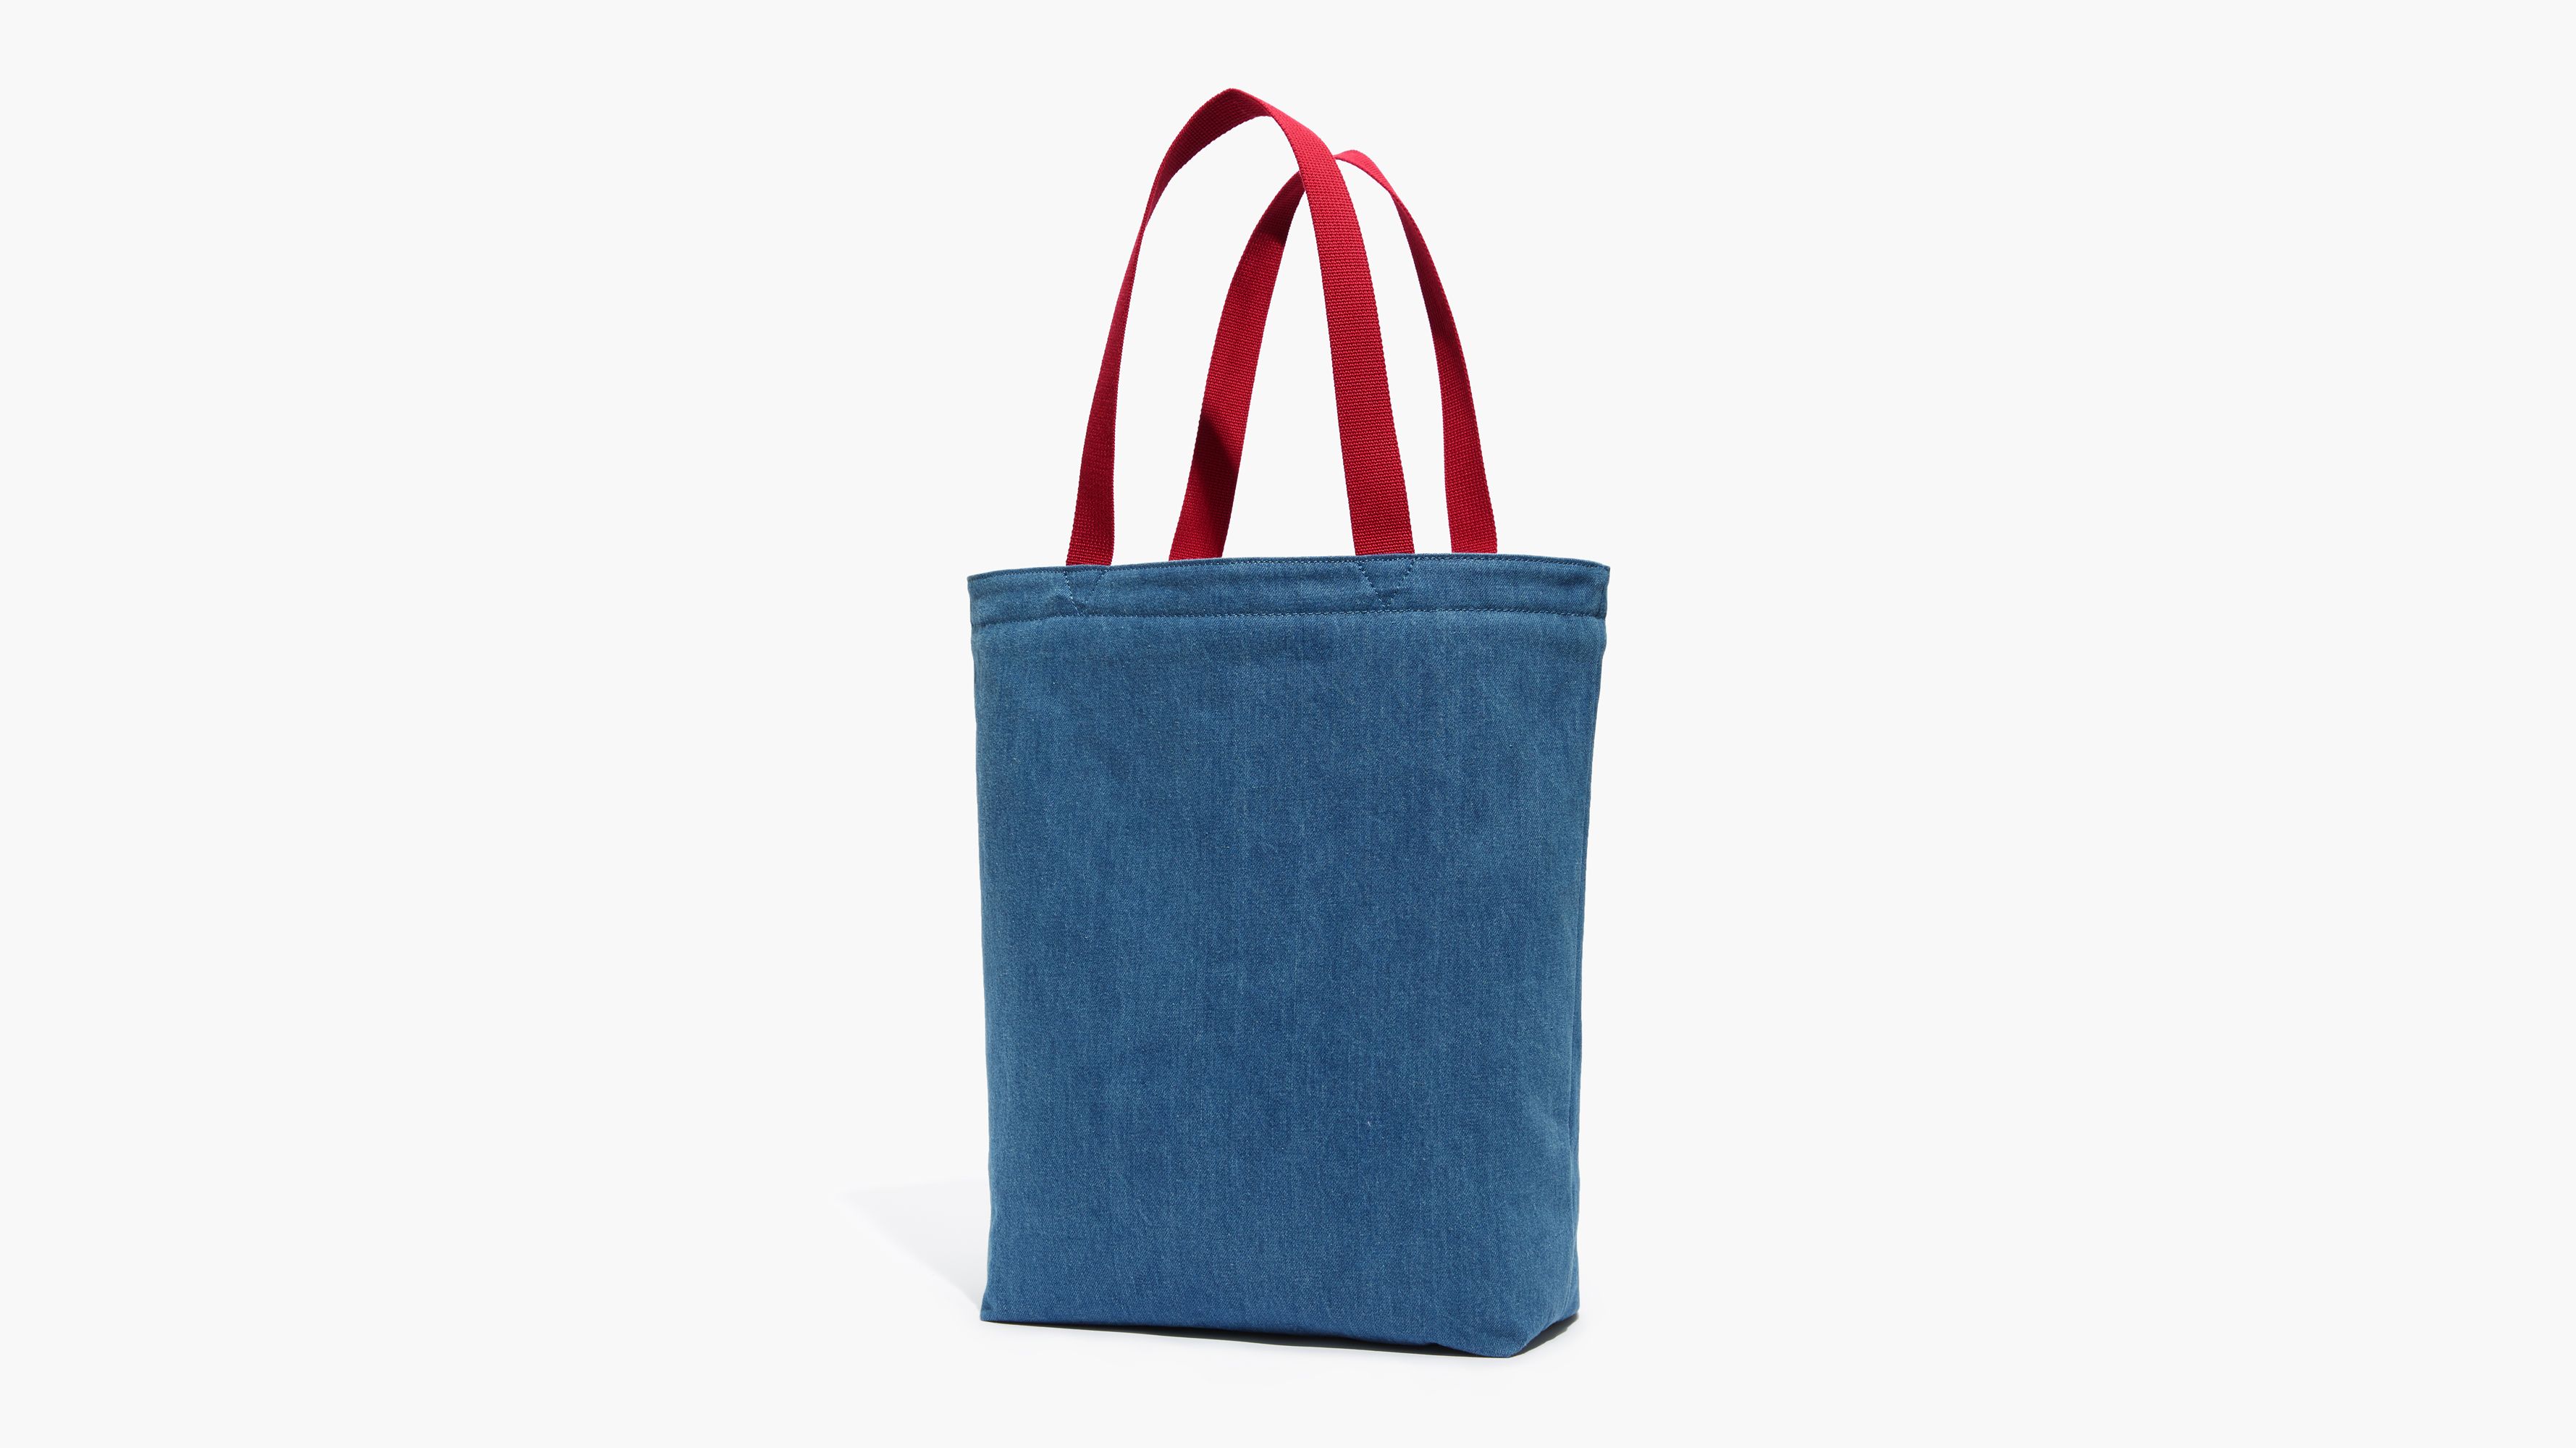 levi's mickey mouse tote bag